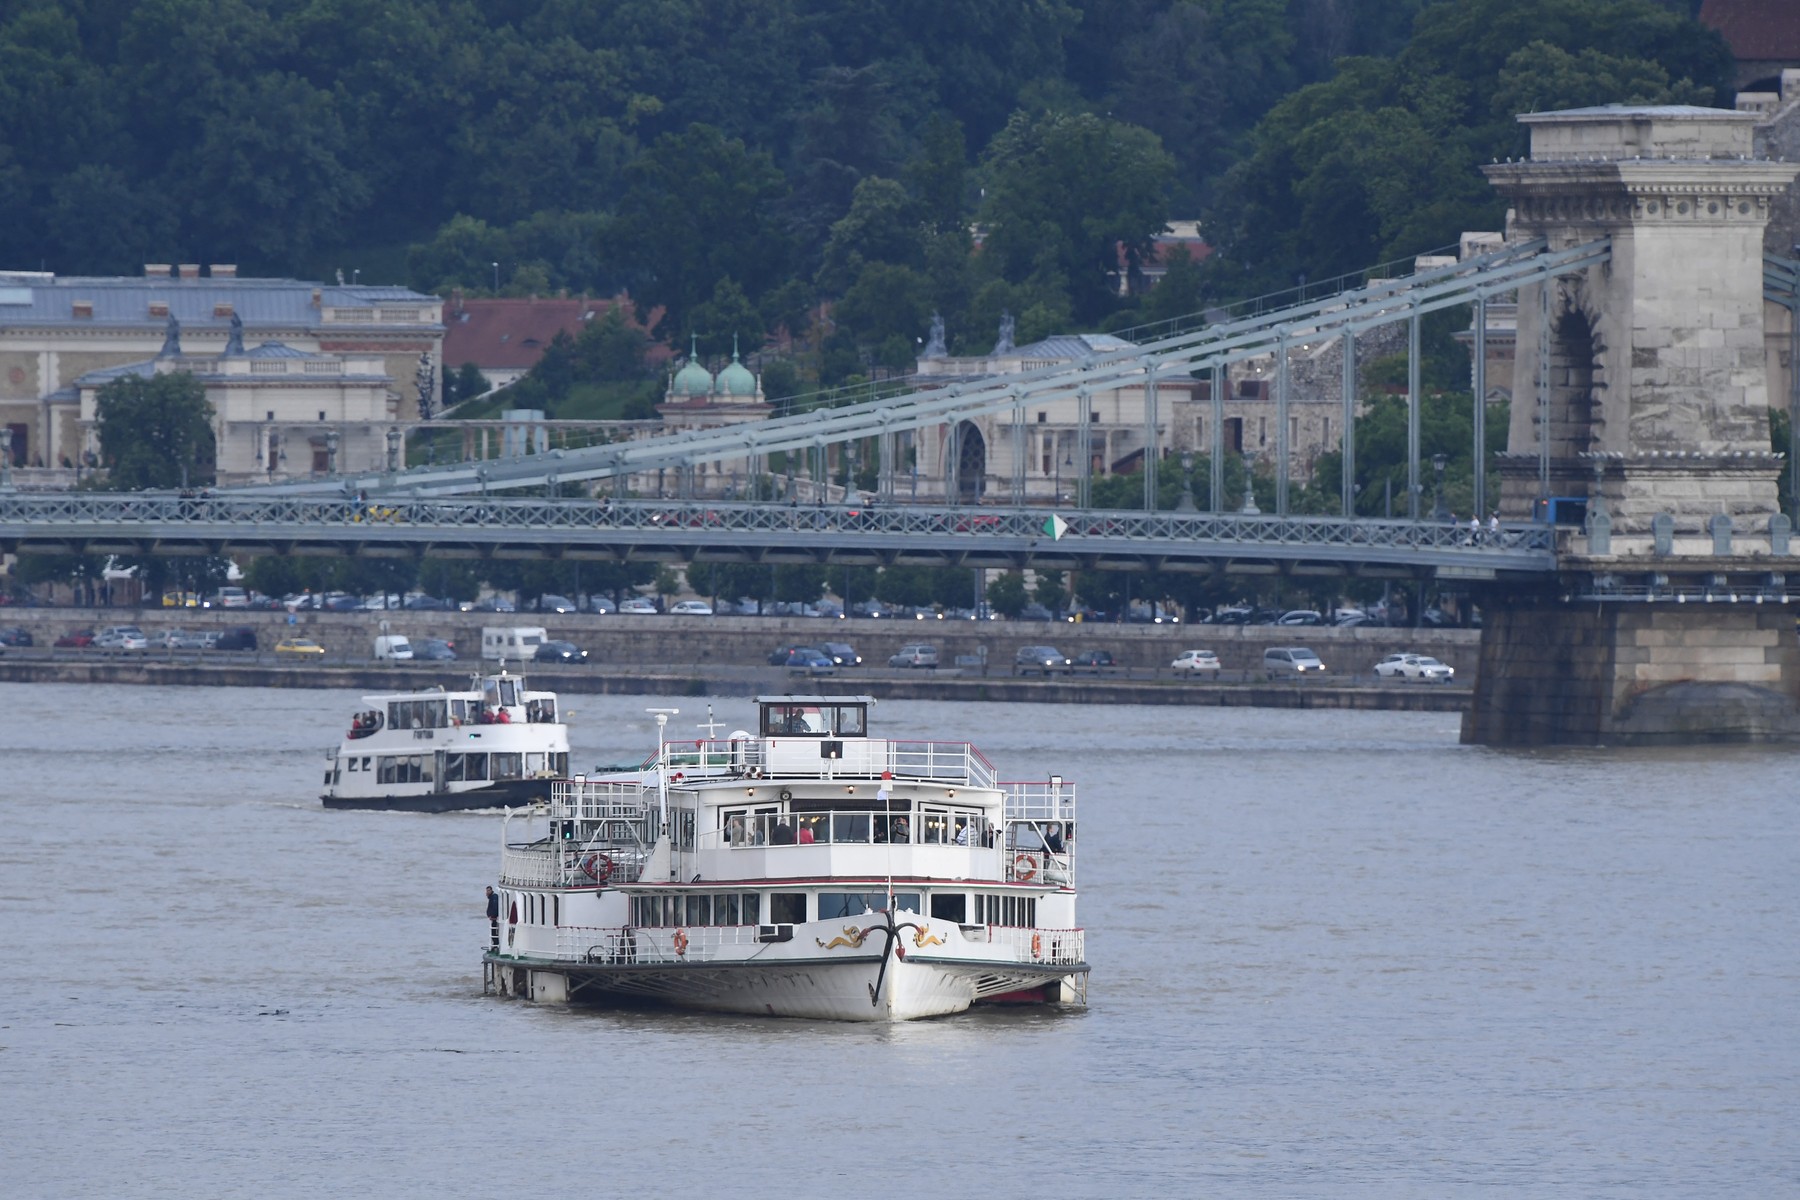 Sightseeing cruises are seen on the Danube river on May 30, 2019 in Budapest during the operations to pull out of the water the "Mermaid" sightseeing boat that sank overnight after colliding with a larger vessel in pouring rain. Hungarian police launched a criminal investigation into one of the country's worst boat accidents that left at least seven South Korean tourists dead and 21 others missing.,Image: 440019027, License: Rights-managed, Restrictions: , Model Release: no, Credit line: Attila KISBENEDEK / AFP / Profimedia